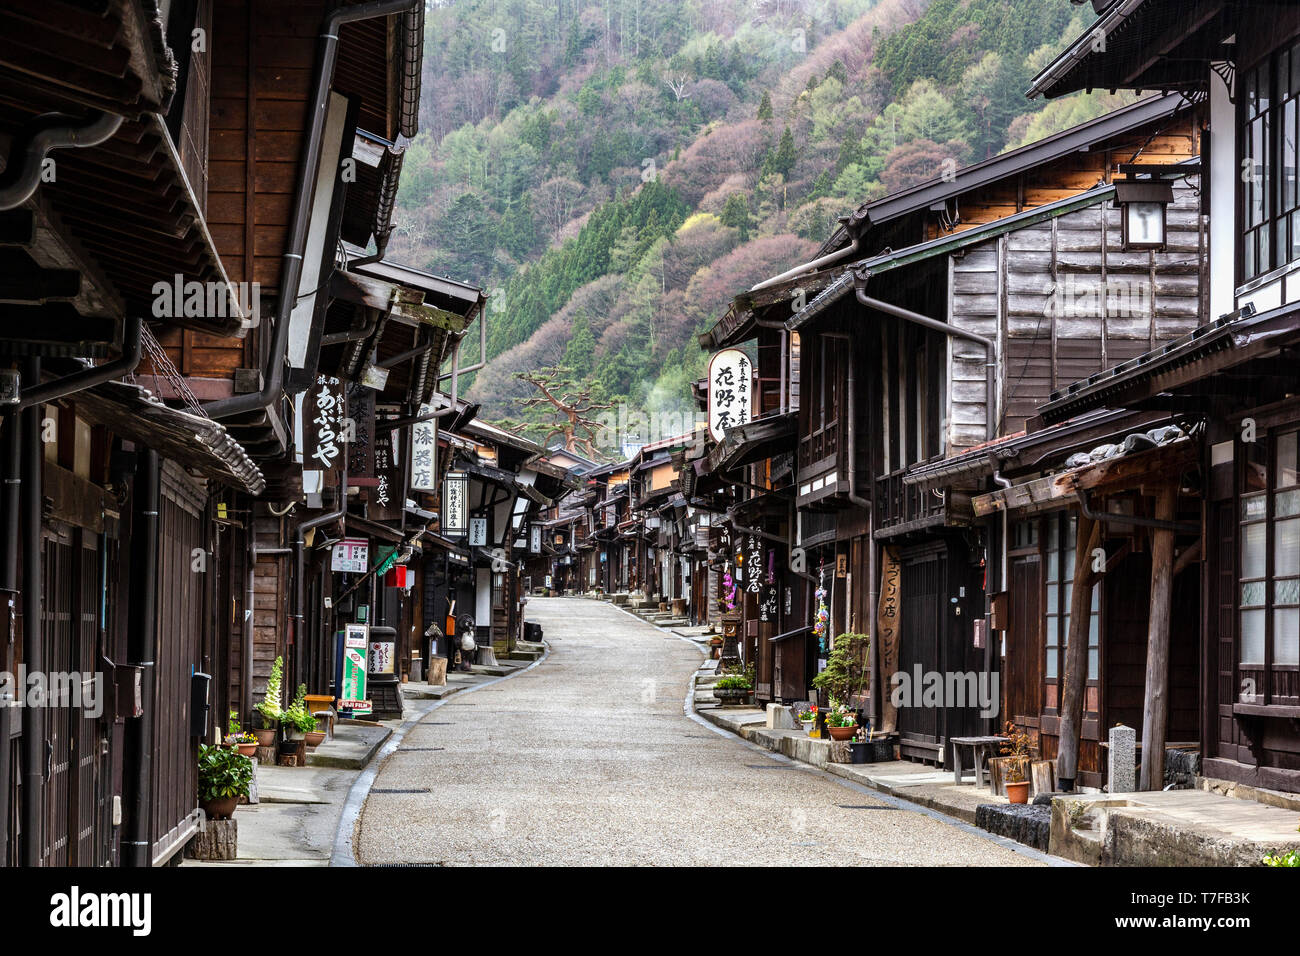 Nakasendo at Narai Juku - The Gokaido highways were established by the Tokugawa shogunate as official routes for daimyo feudal lords and their retaine Stock Photo